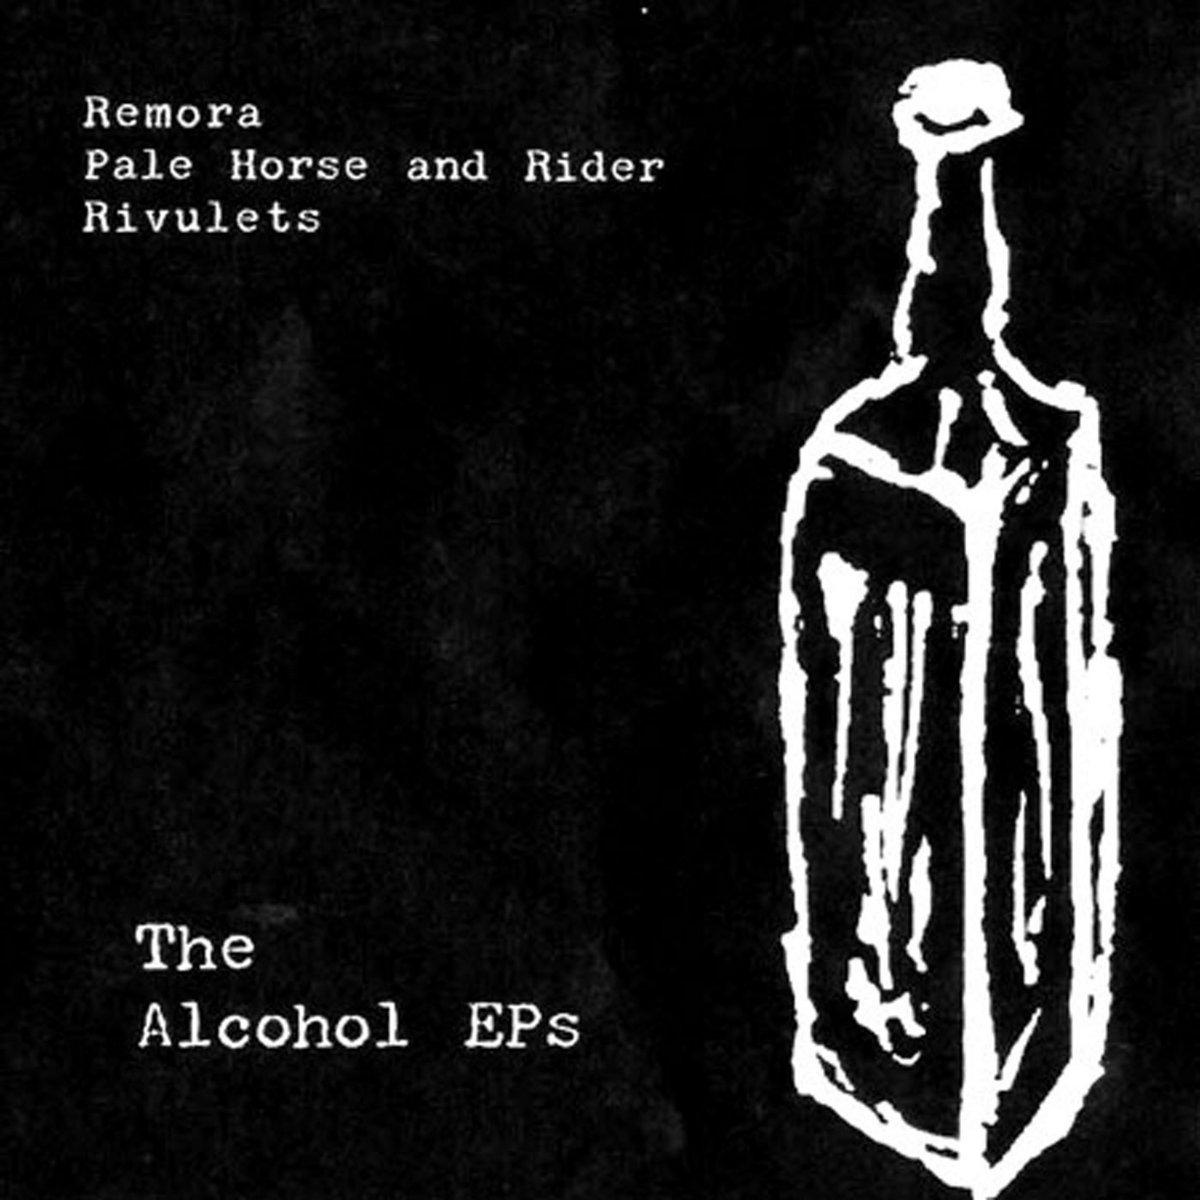 Pale Horse and Rider, Remora, Rivulets - The Alcohol Eps